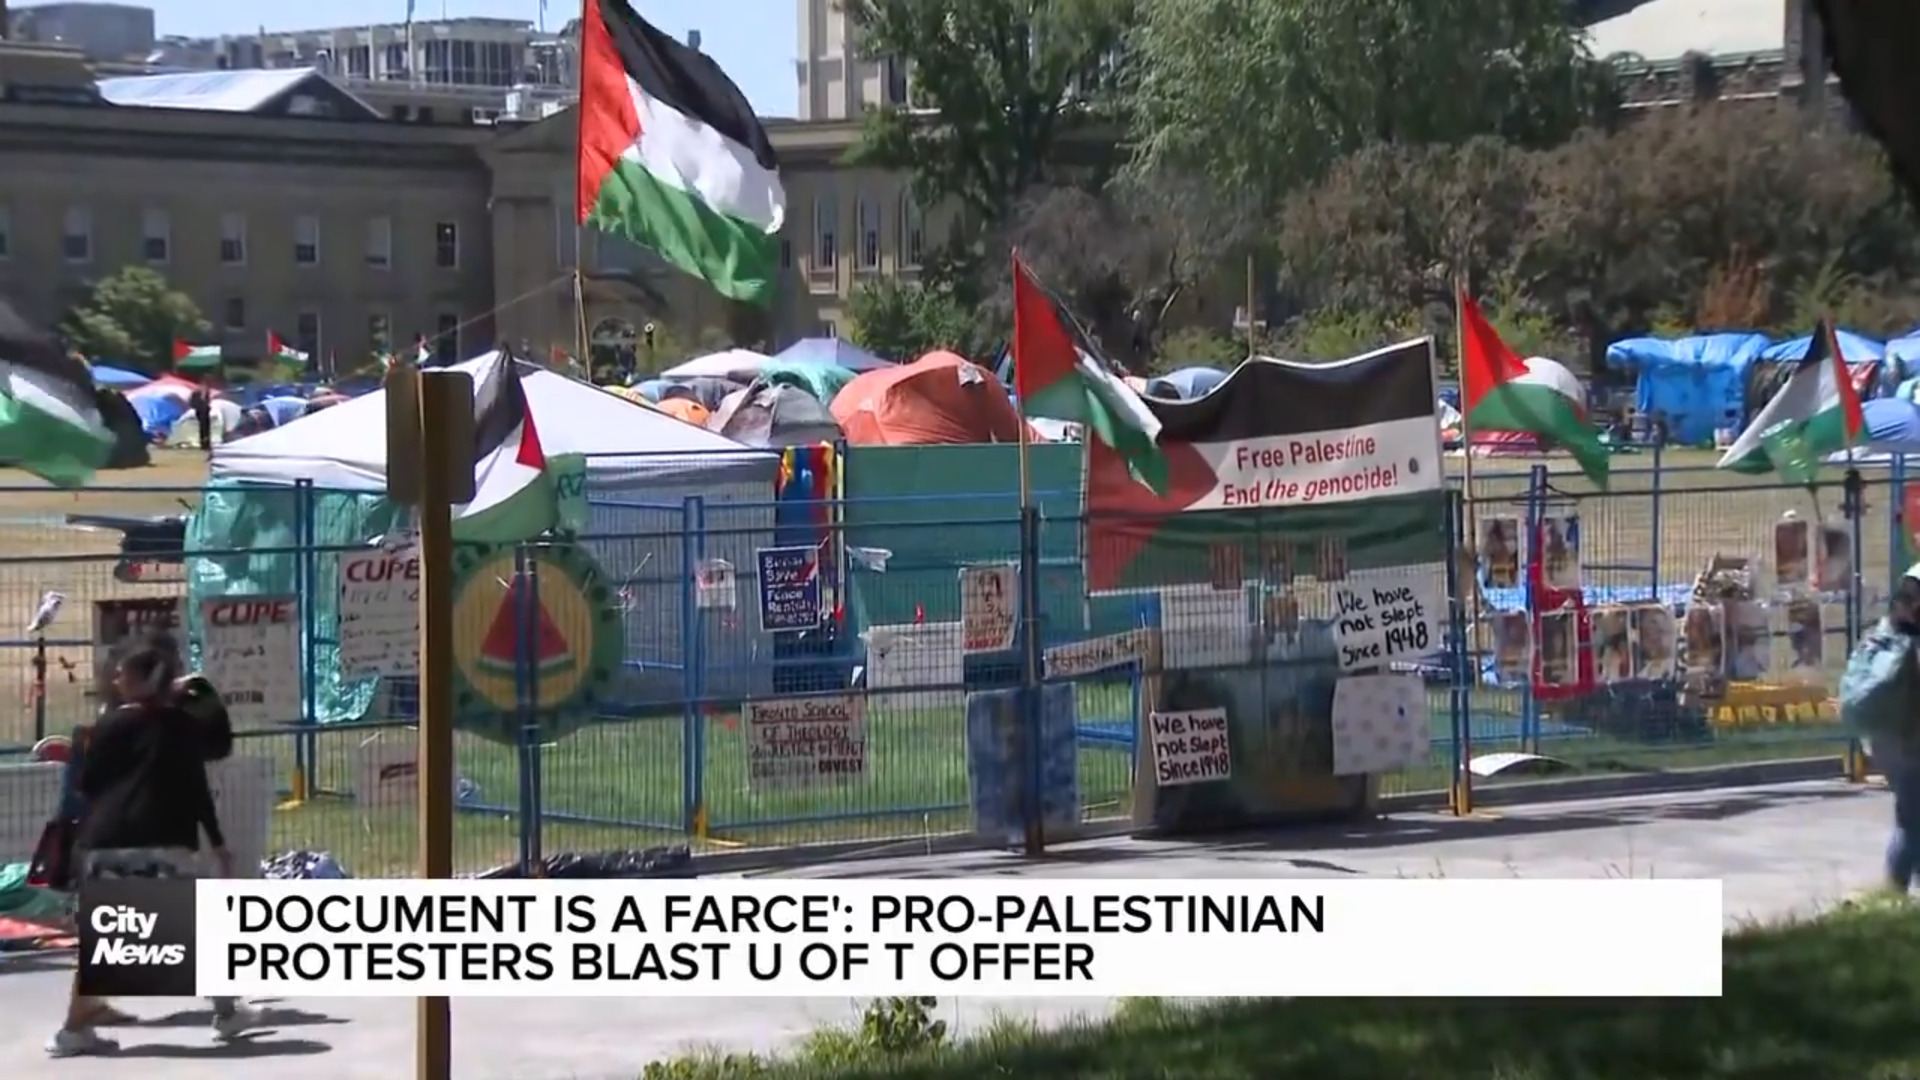 Pro-Palestinian protesters call offer from U of T 'a farce'